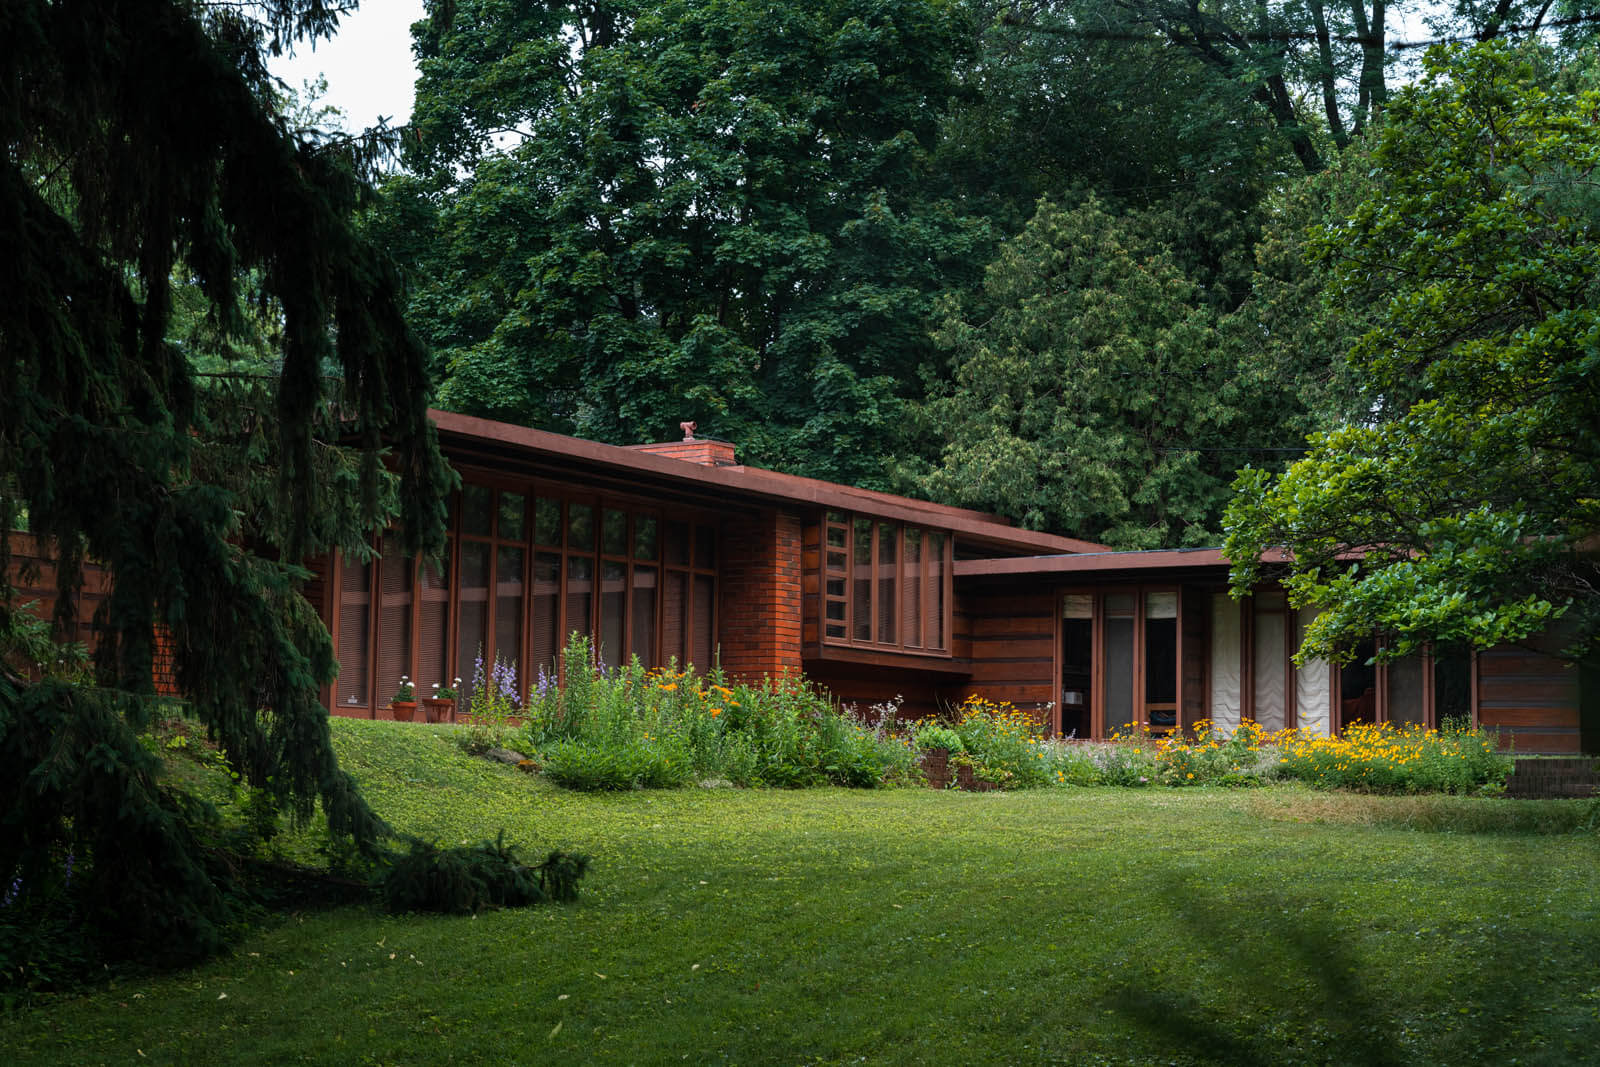 The Herbert Jacobs Usonian house in Madison Wisconsin by Frank Lloyd Wright